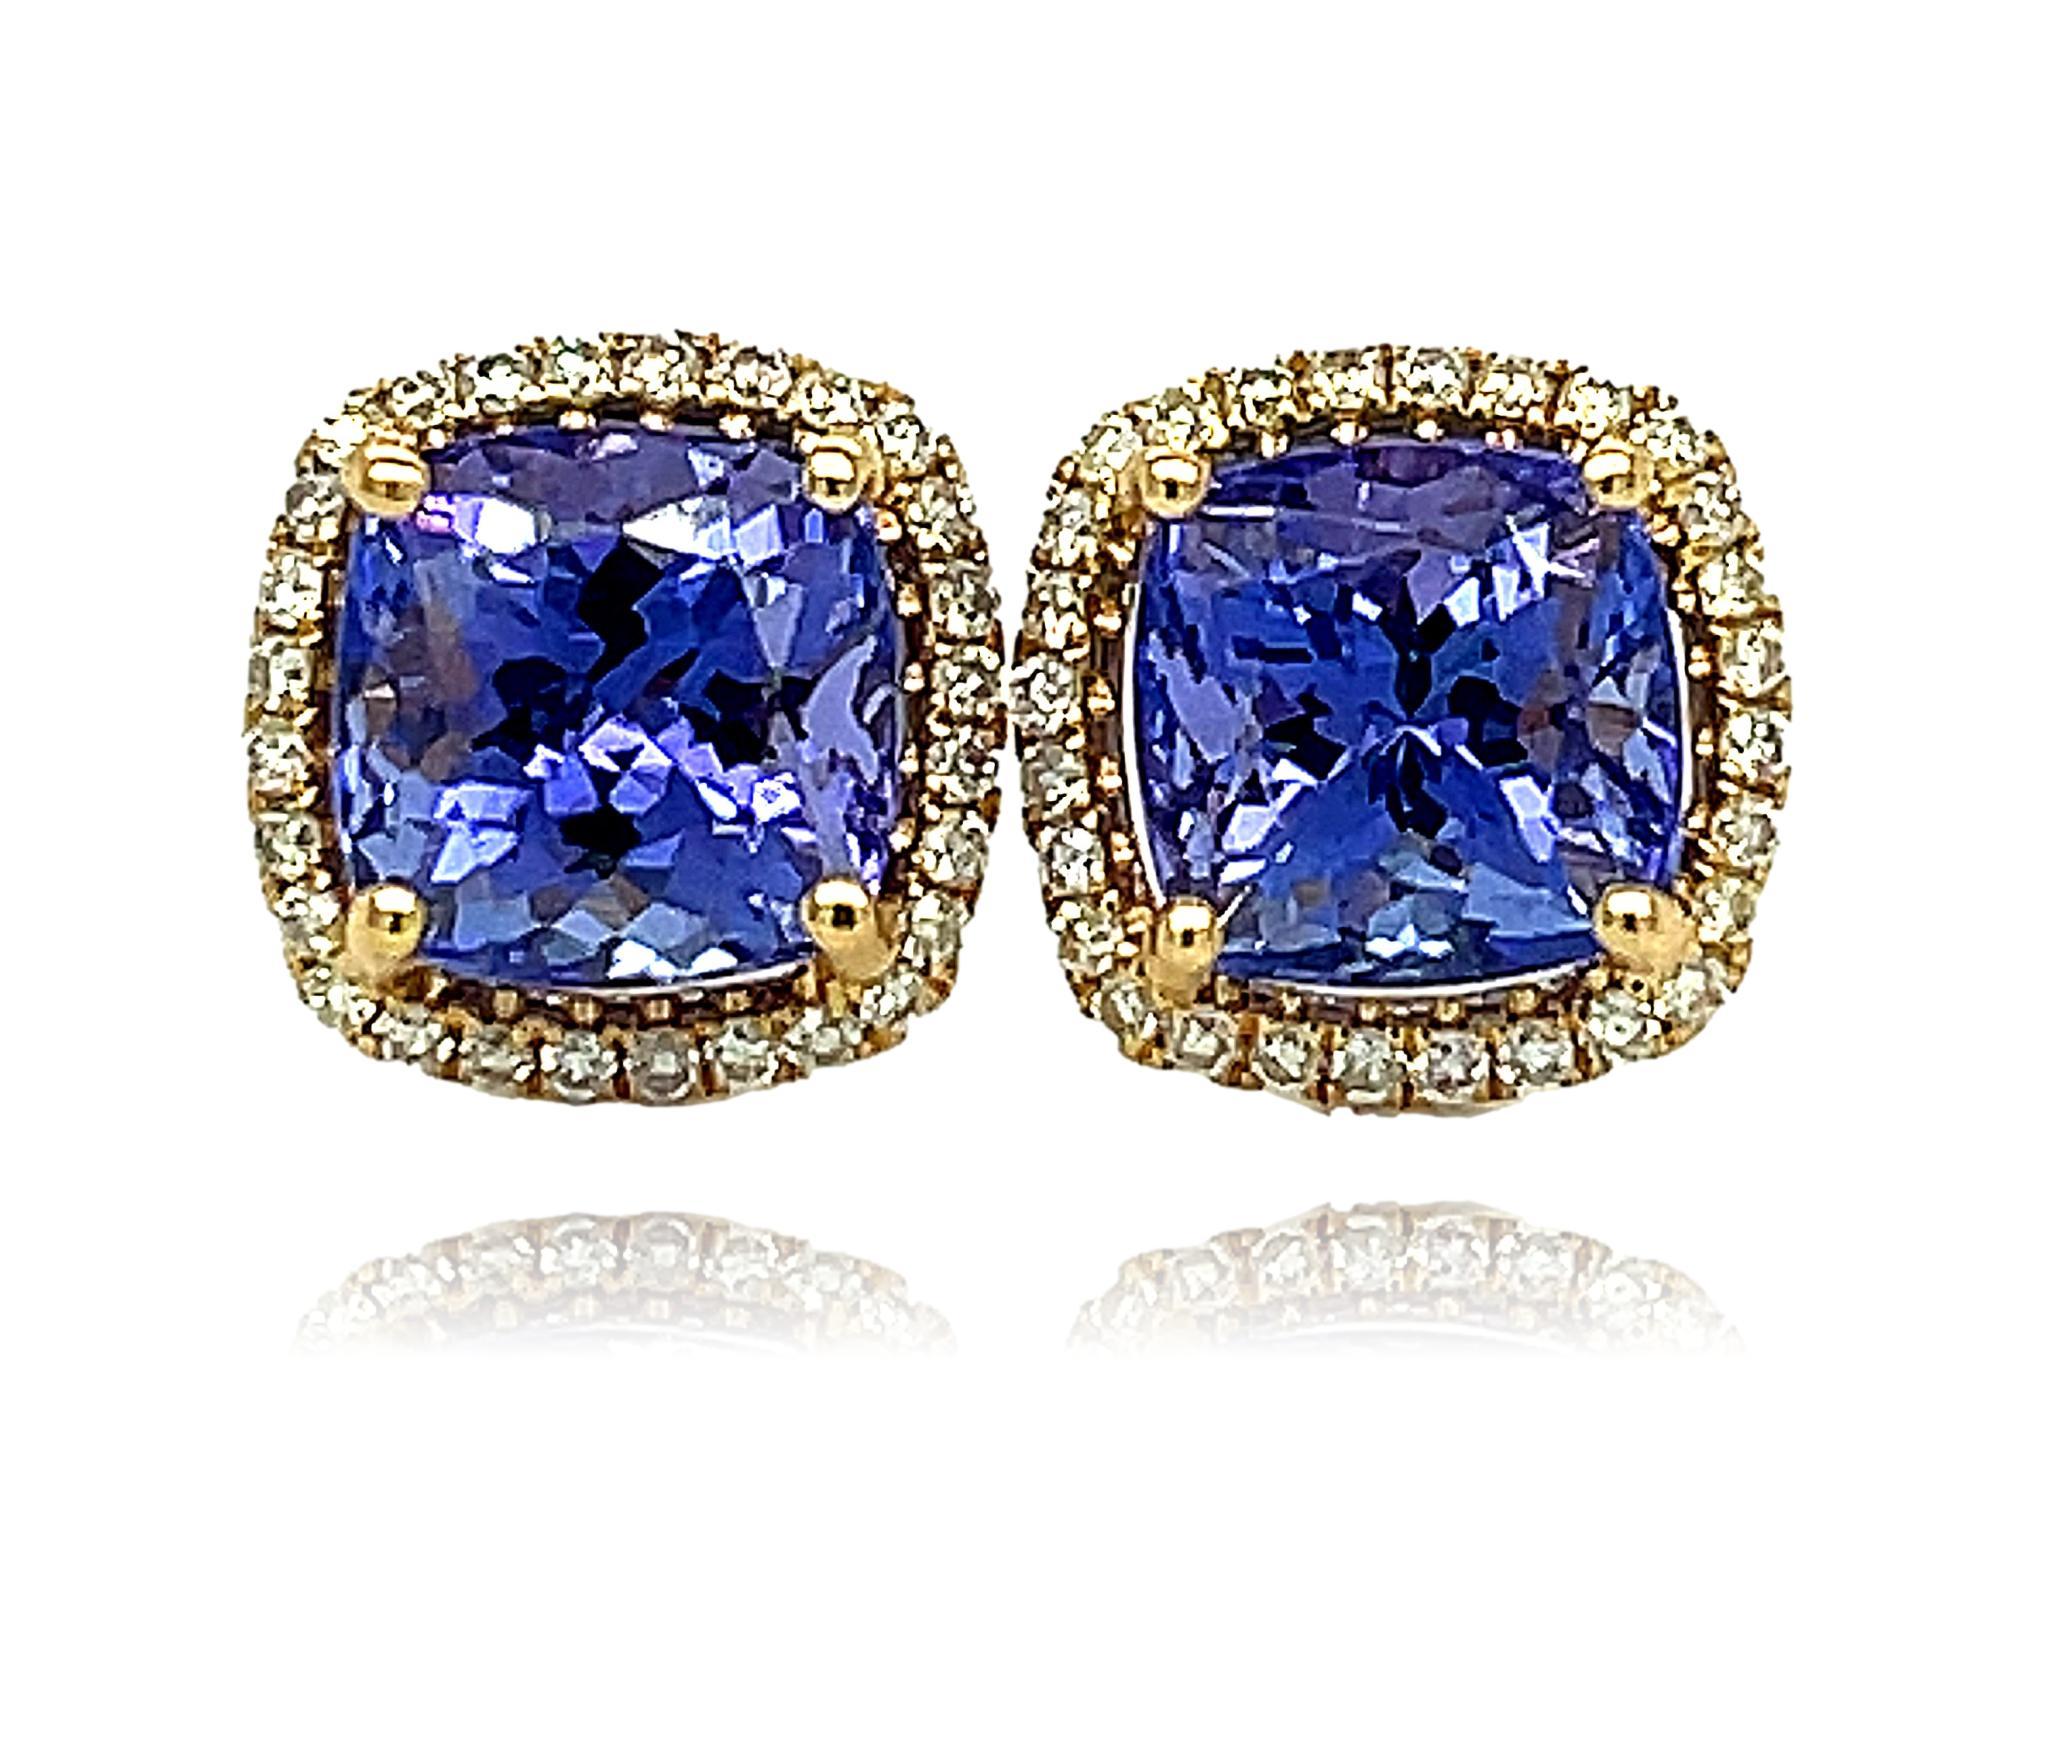 These gorgeous 7mm cushion cut AAA quality deep blue Tanzanite stud earrings are beautiful to wear for that special event. They have a 4 prong setting in 18 karat yellow gold. They have double push back closure for extra security. They have detailed